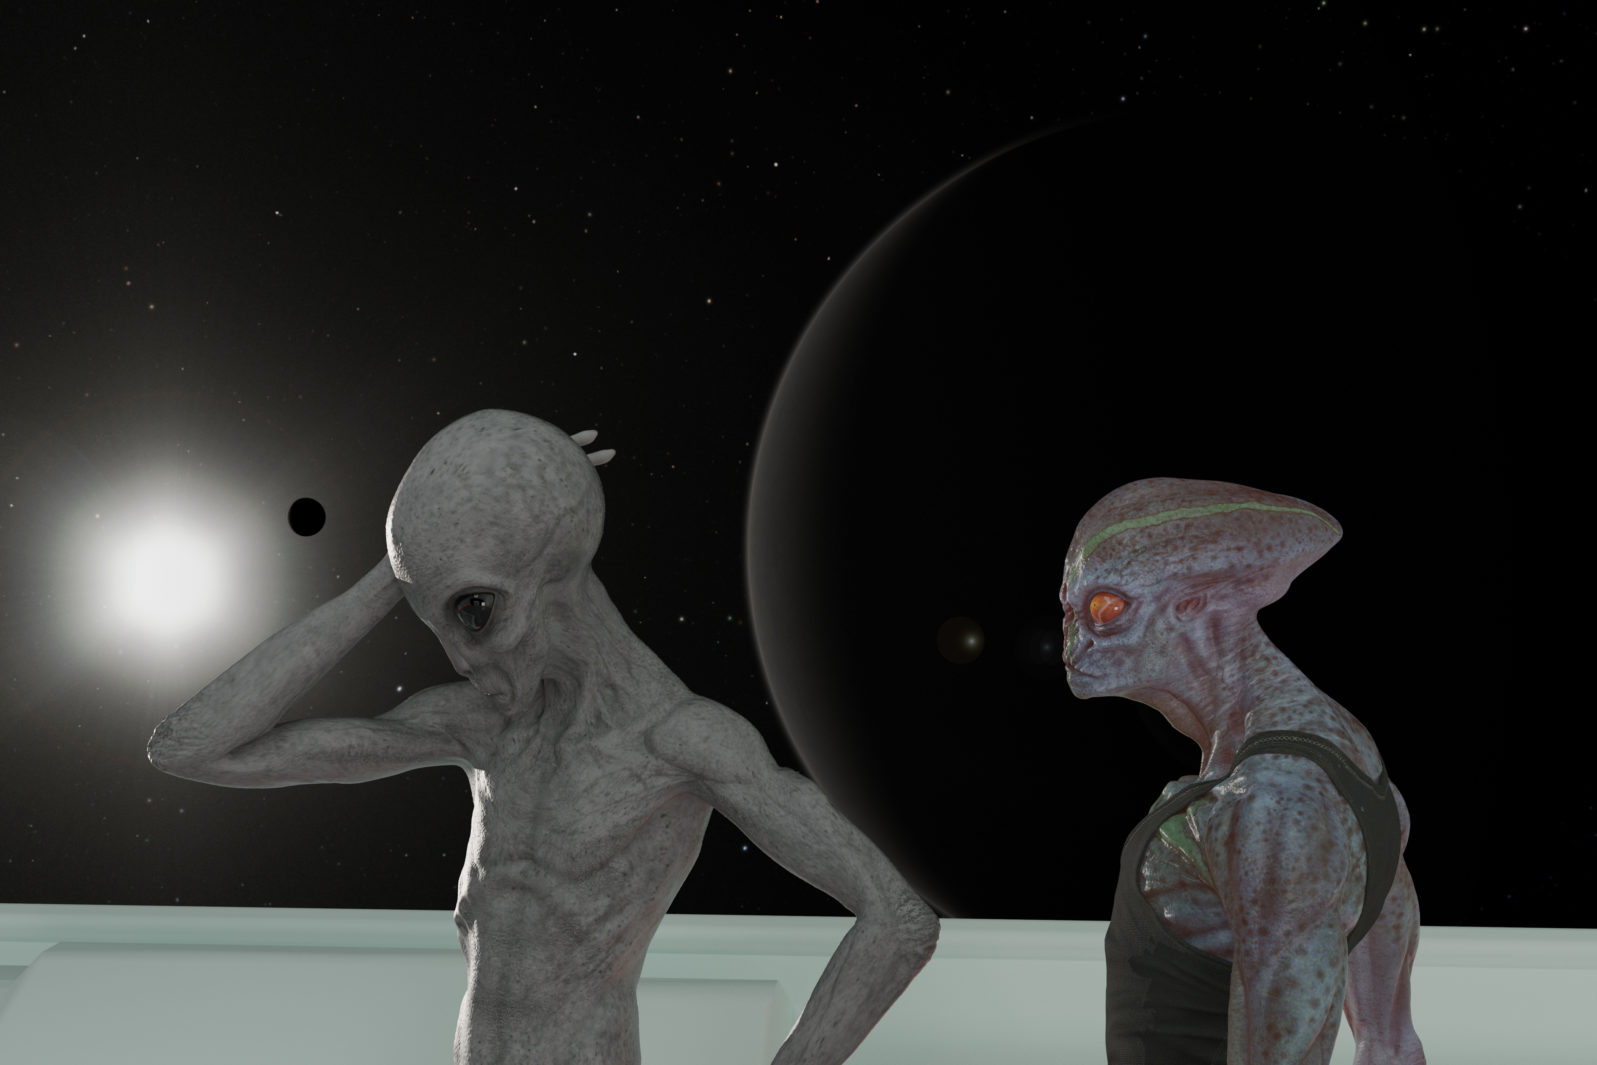 Illustration of two different aliens talking inside a spaceship with a dark planet sun and moon in outer space in the background.